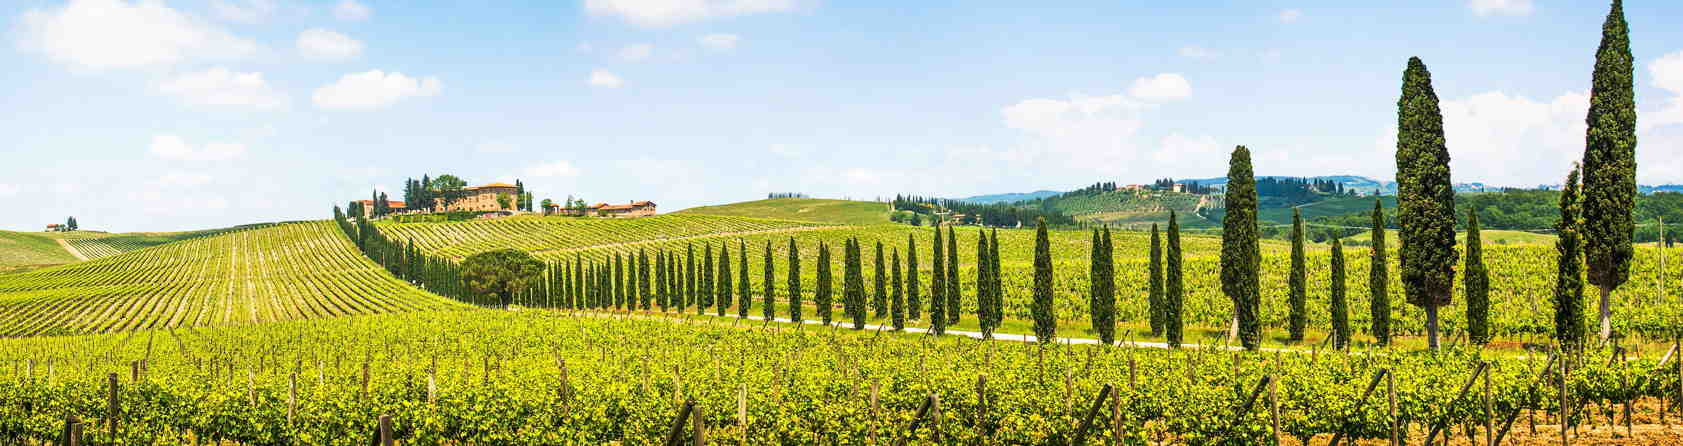 Half Day Chianti Wine Tour from Florence €45